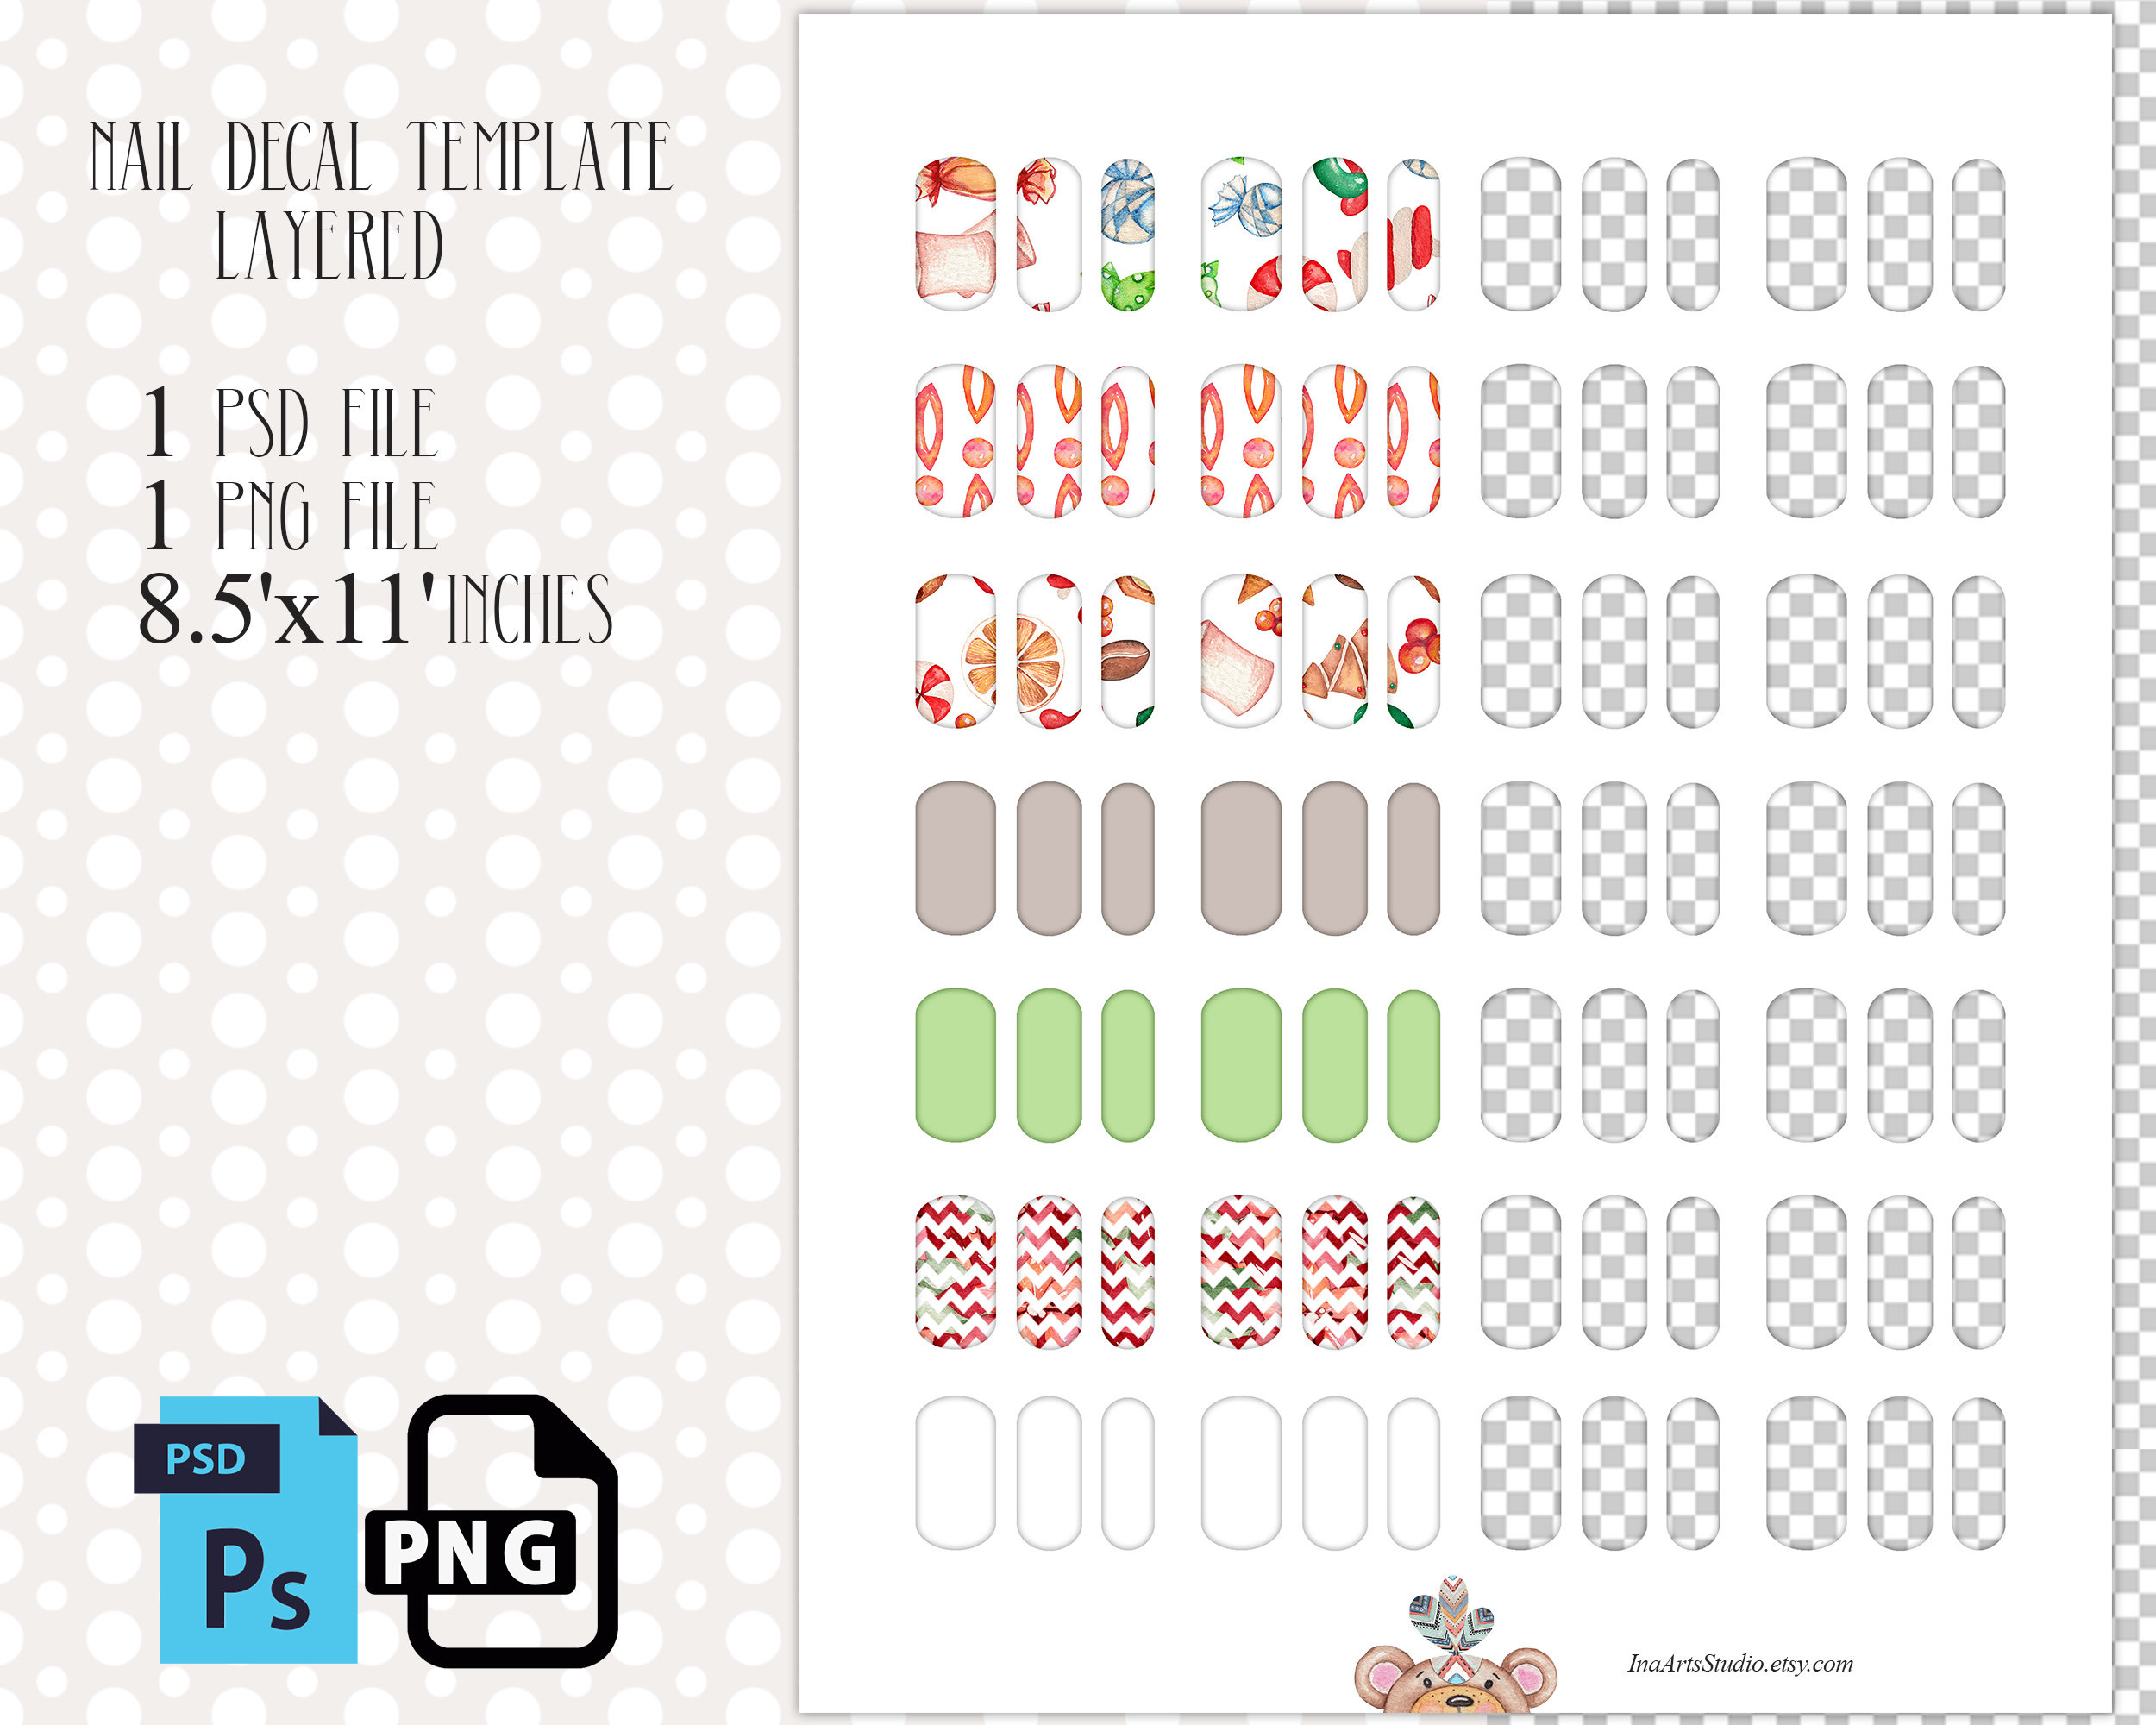 3. Lettering Nail Art Decals - wide 11